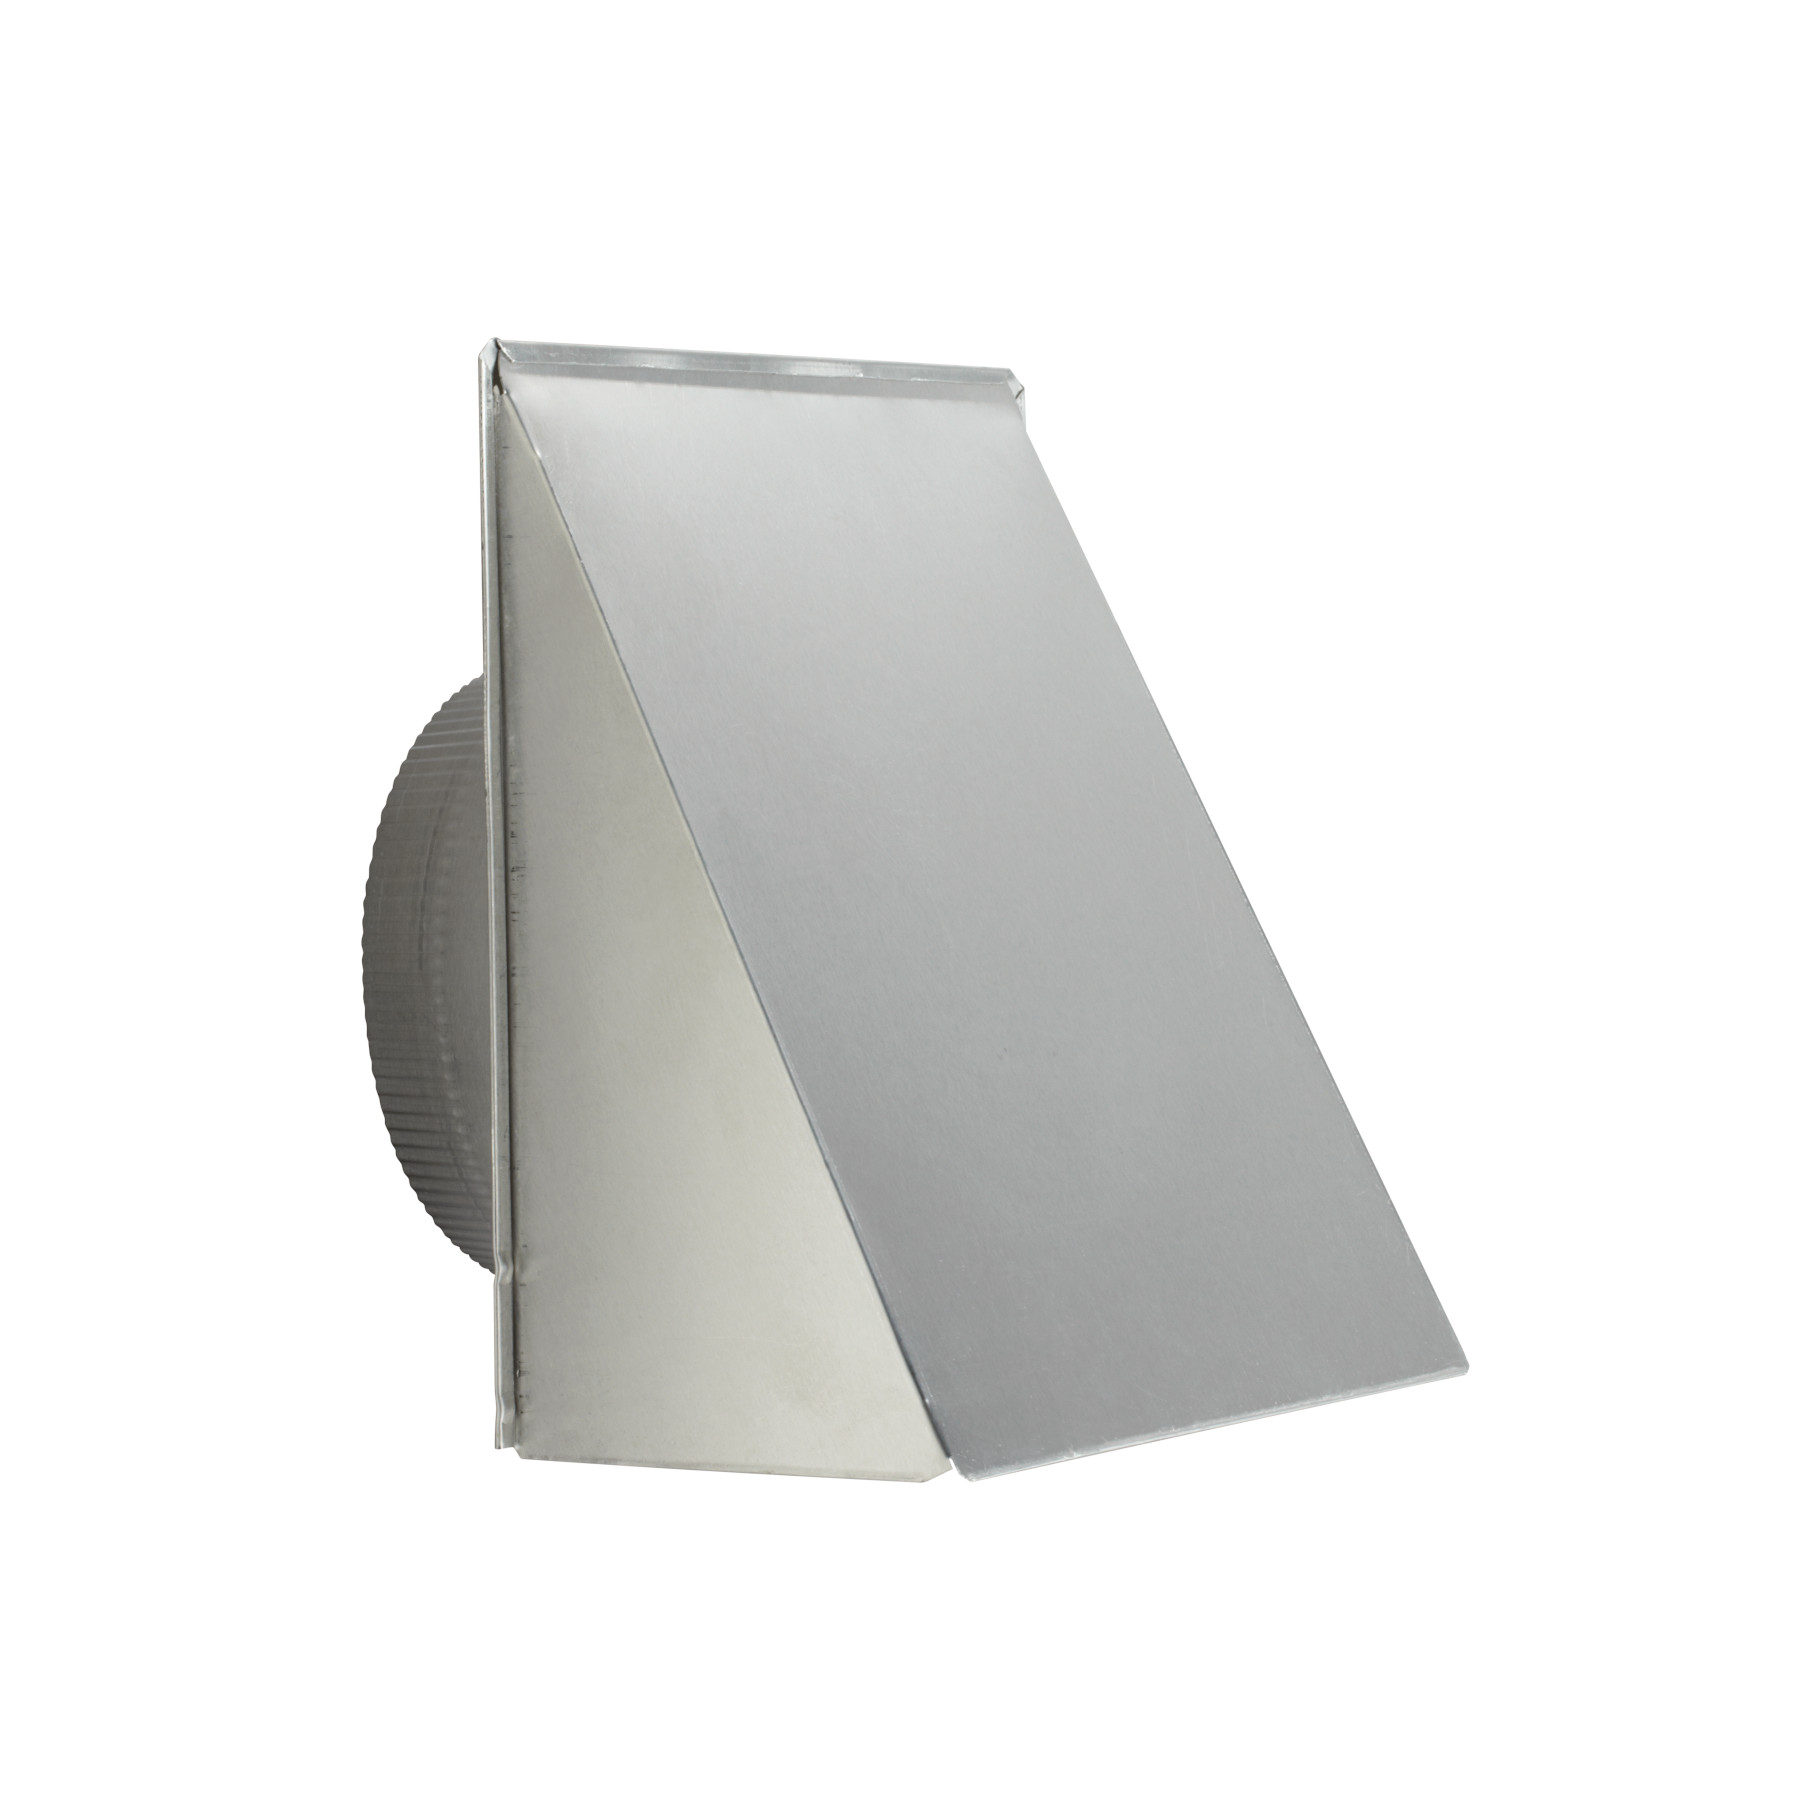 Fresh Air Inlet Wall Cap for 8-Inch Round Duct for Range Hoods and Bath Ventilation Fans